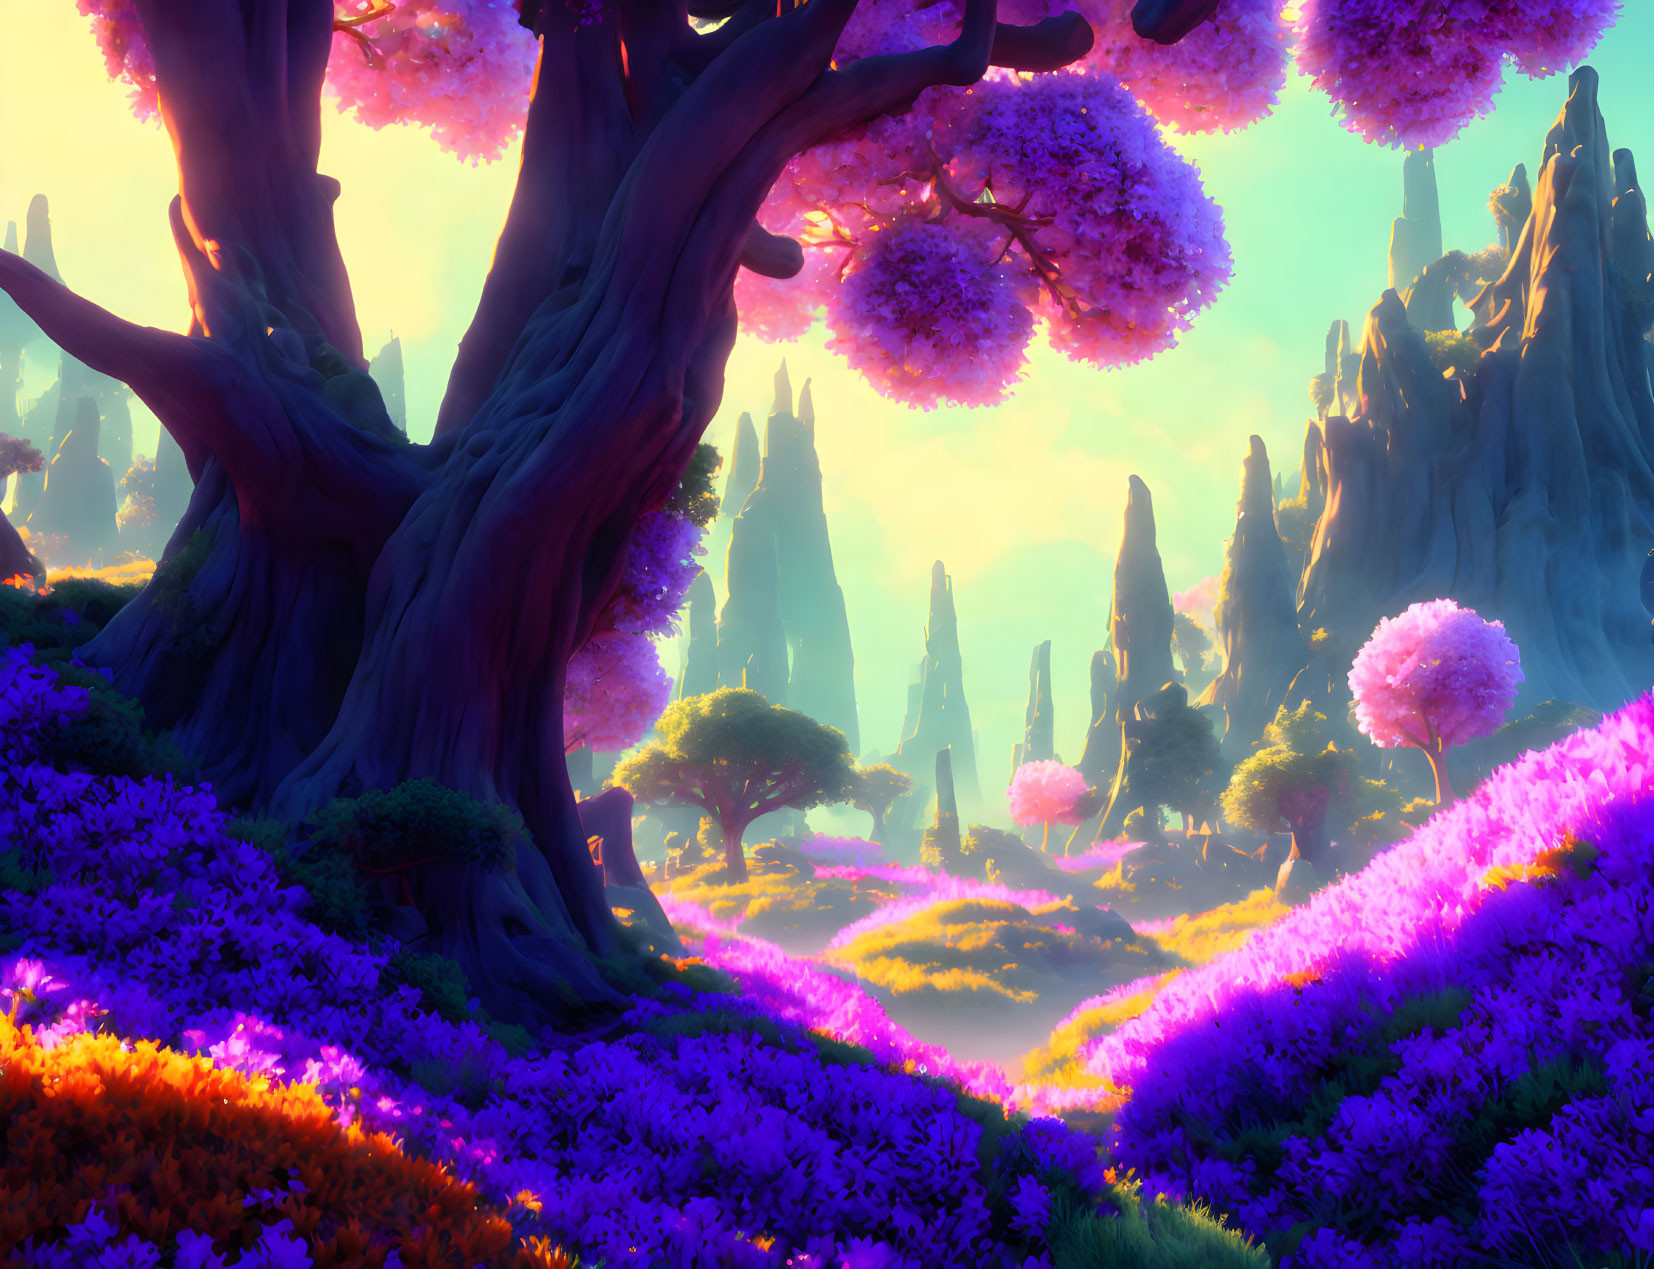 Colorful fantasy landscape with purple foliage, towering pink trees, and glowing sky